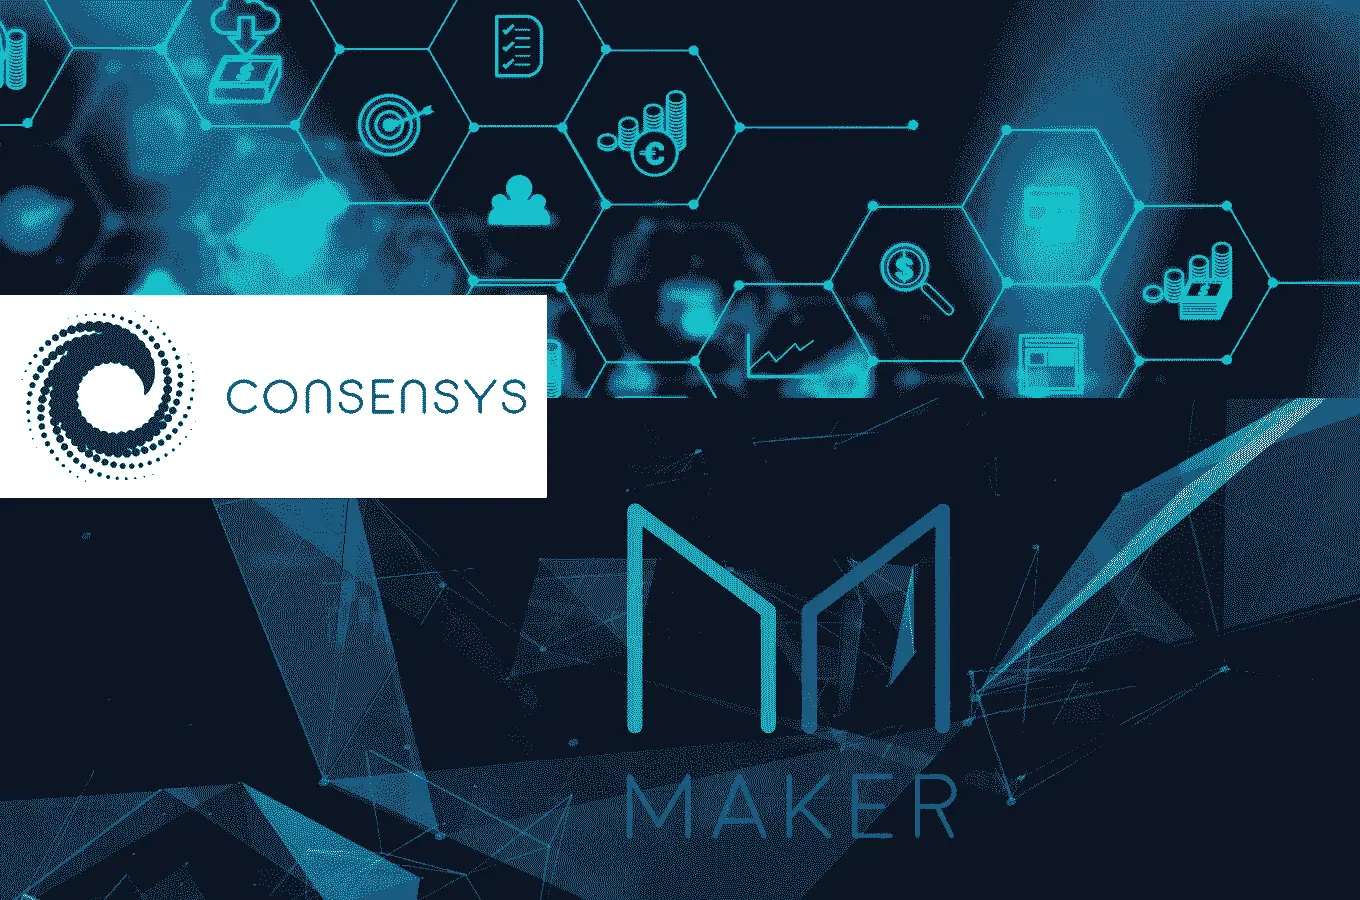 MakerDAO ConsenSys and OptiMize Encourage to Utilize Blockchain for a Better Society